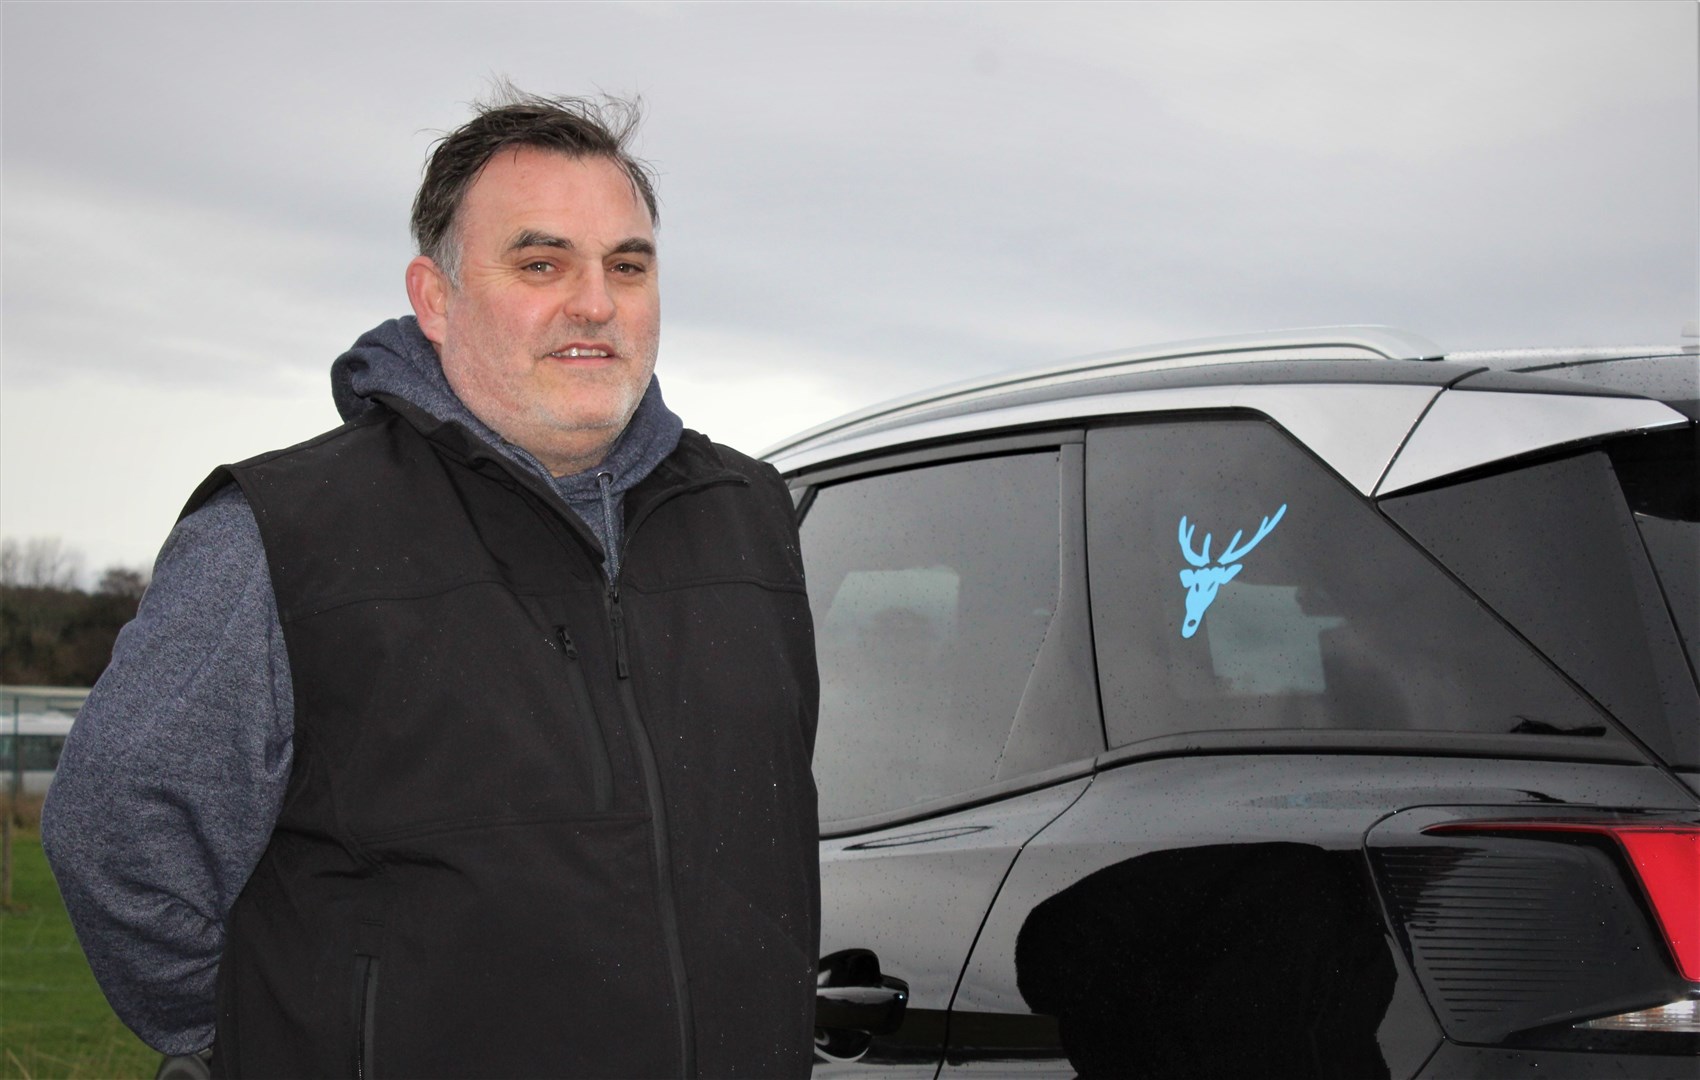 David Purvis of DP Taxis in Tain will install defibrillators in both of his vehicles, and will donate a third to the Star Inn in Tain.